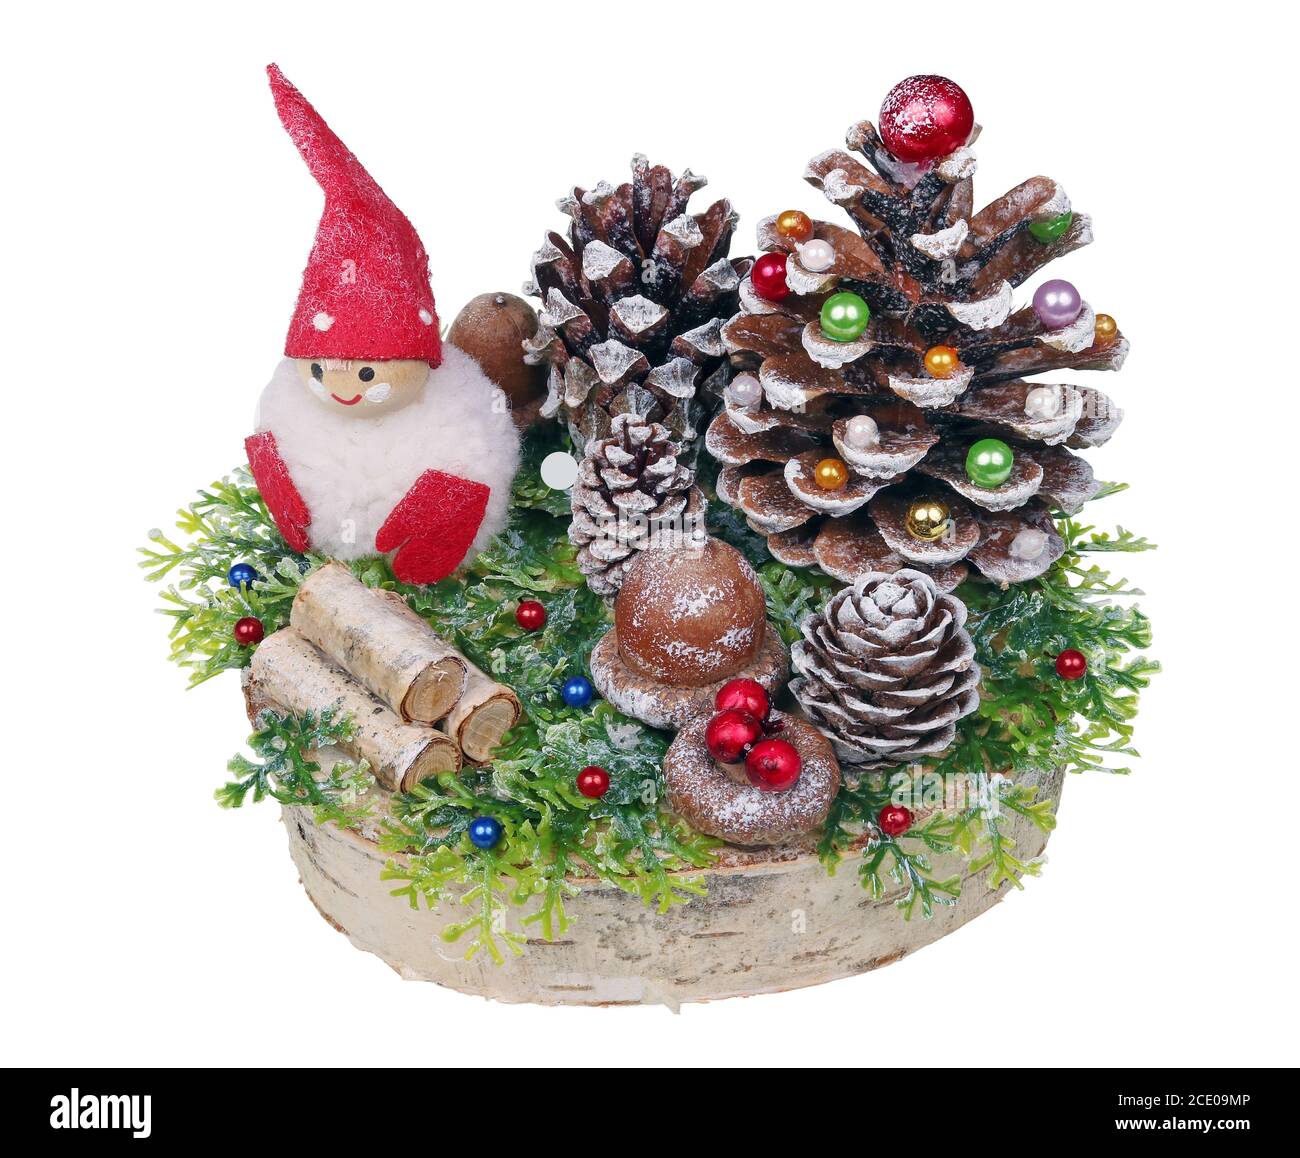 Christmas homemade fir tree and Santa Claus in rustic style made  pine cone red berries and birch stump  isolated macro Stock Photo